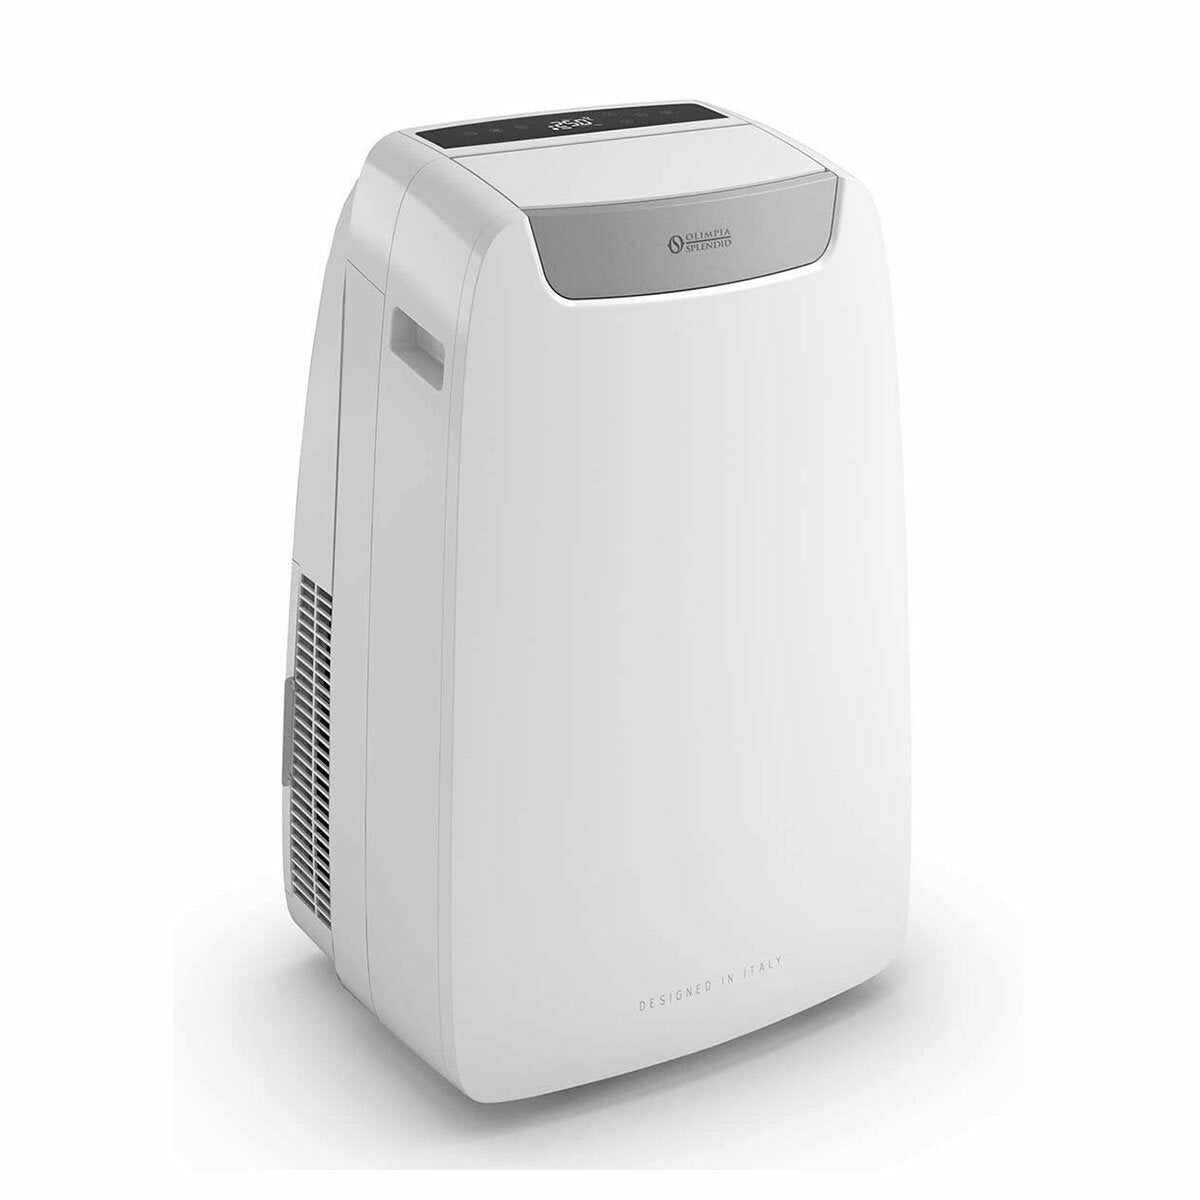 Olimpia Splendid Dolceclima Air Pro 14 HP portable air conditioner 14.000 BTU Class A /A+ cold/hot